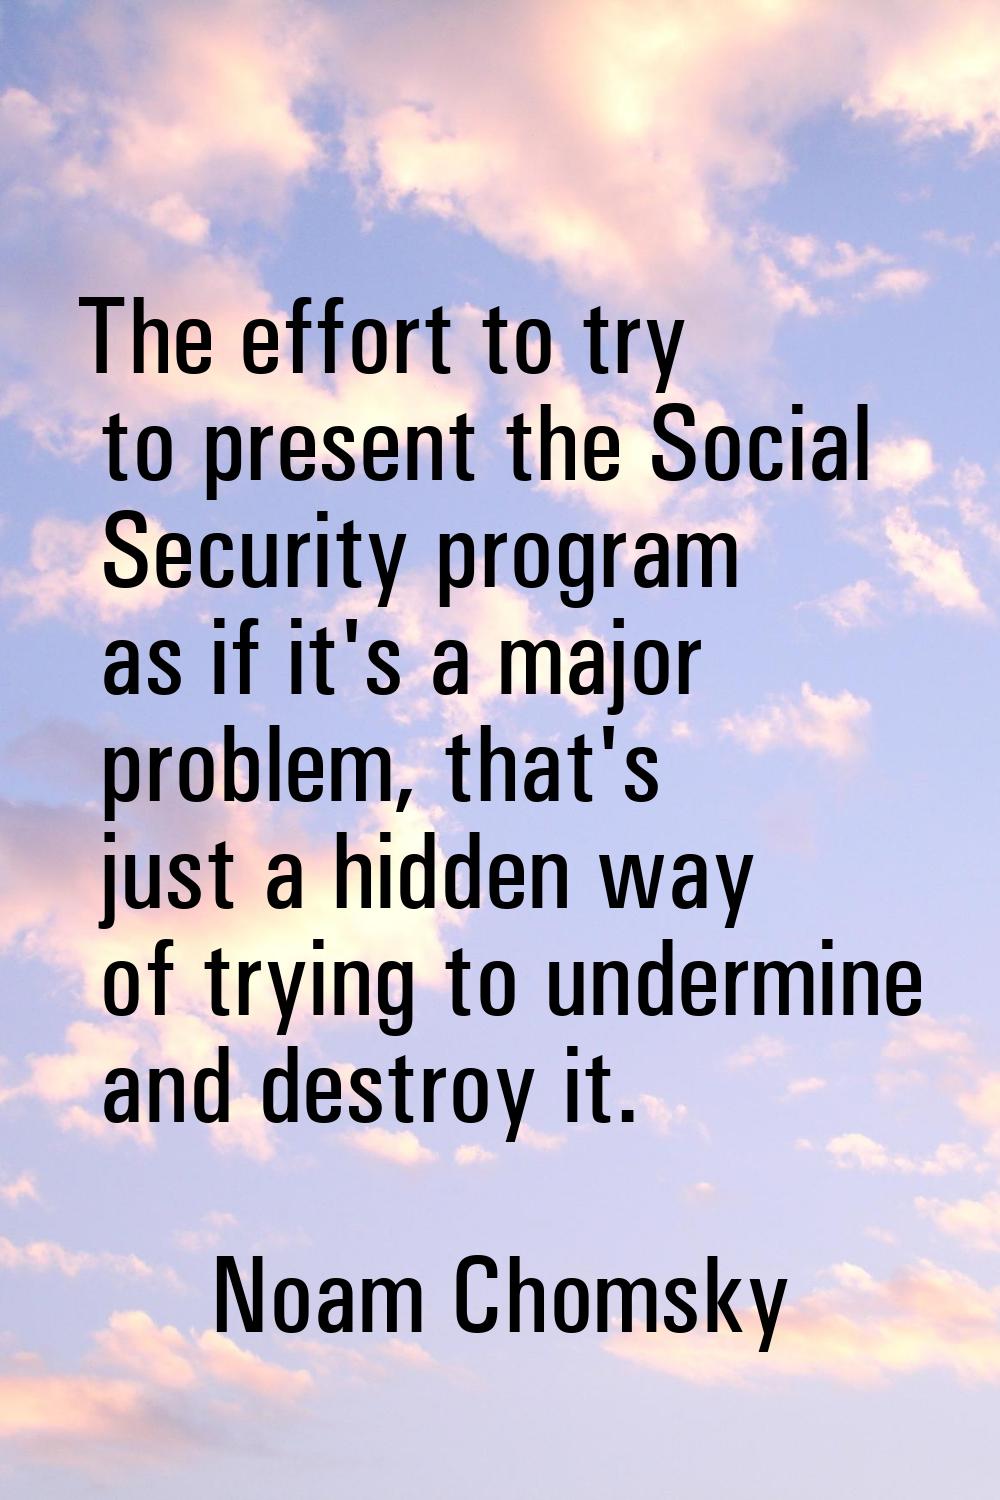 The effort to try to present the Social Security program as if it's a major problem, that's just a 